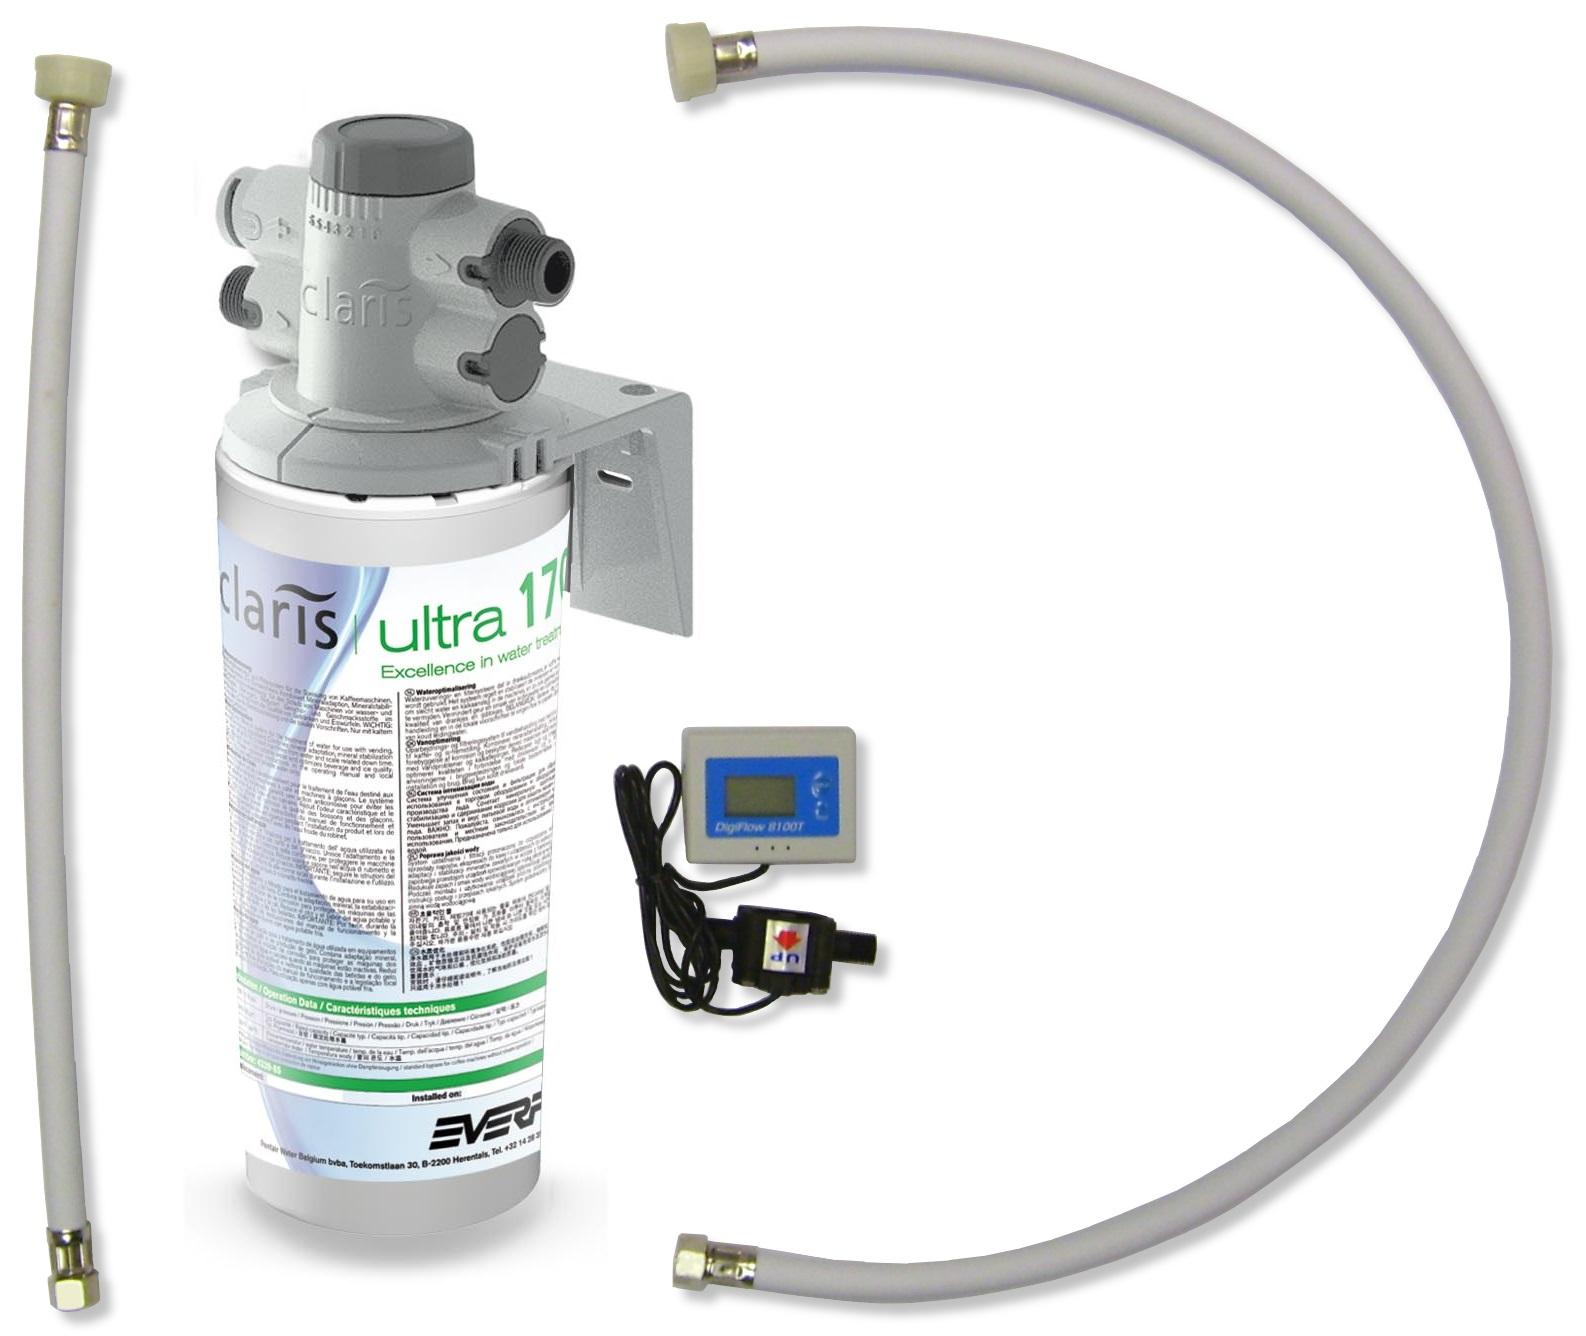 Claris Ultra Medium Filtration Kit (for 2 Group Coffee/Espresso Machines)